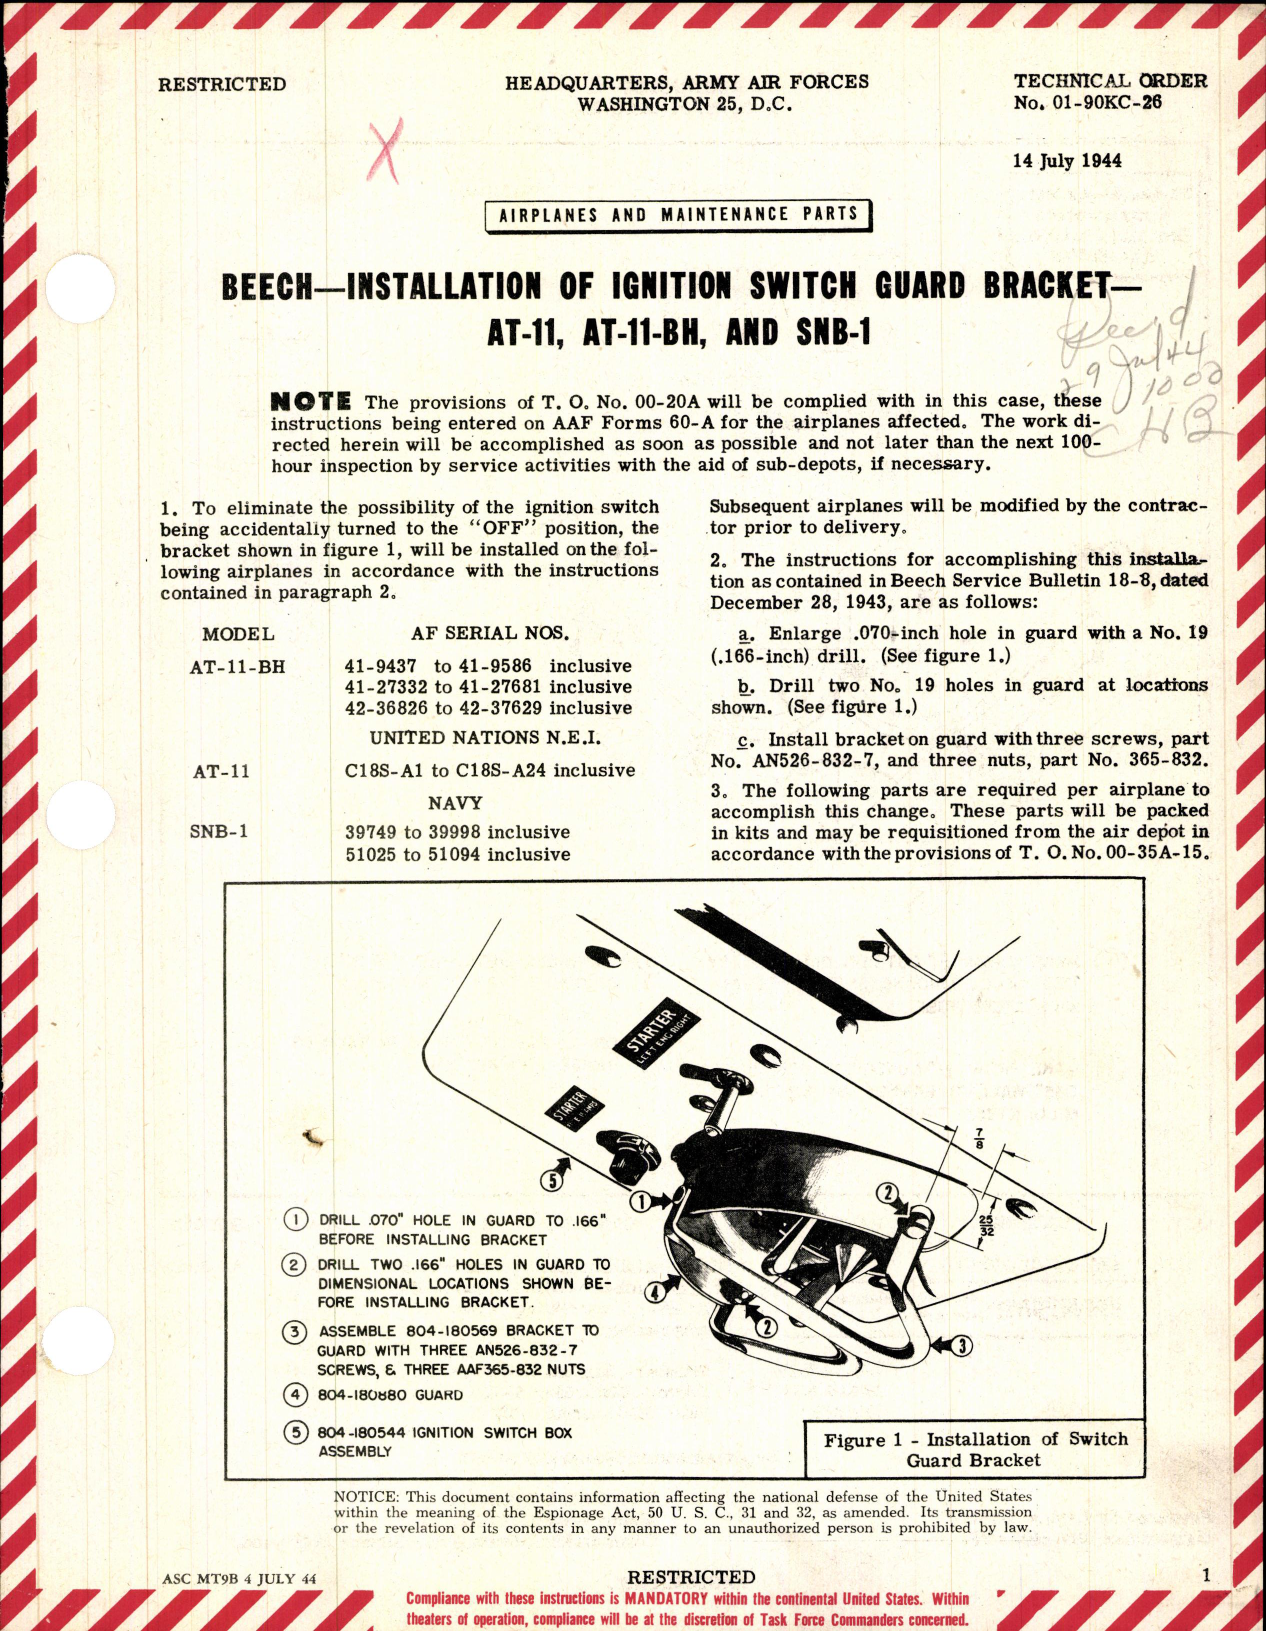 Sample page 1 from AirCorps Library document: Installation of Ignition Switch Guard Bracket for AT-11, AT-11-BH, and SNB-1